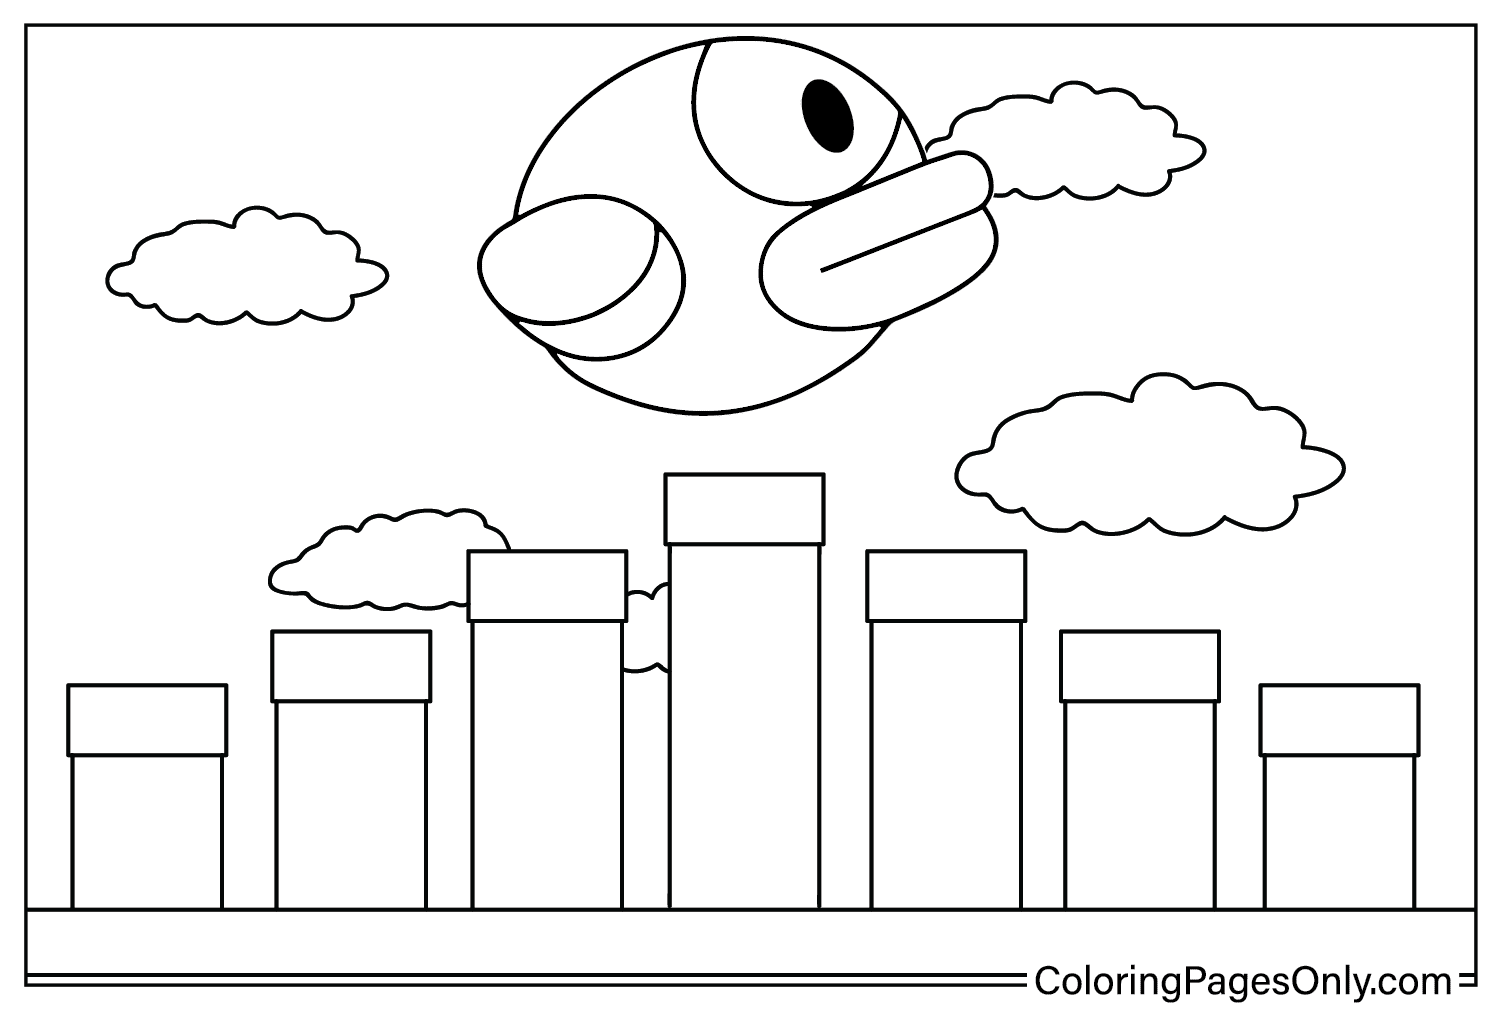 Flappy Bird Images to Color from Flappy Bird